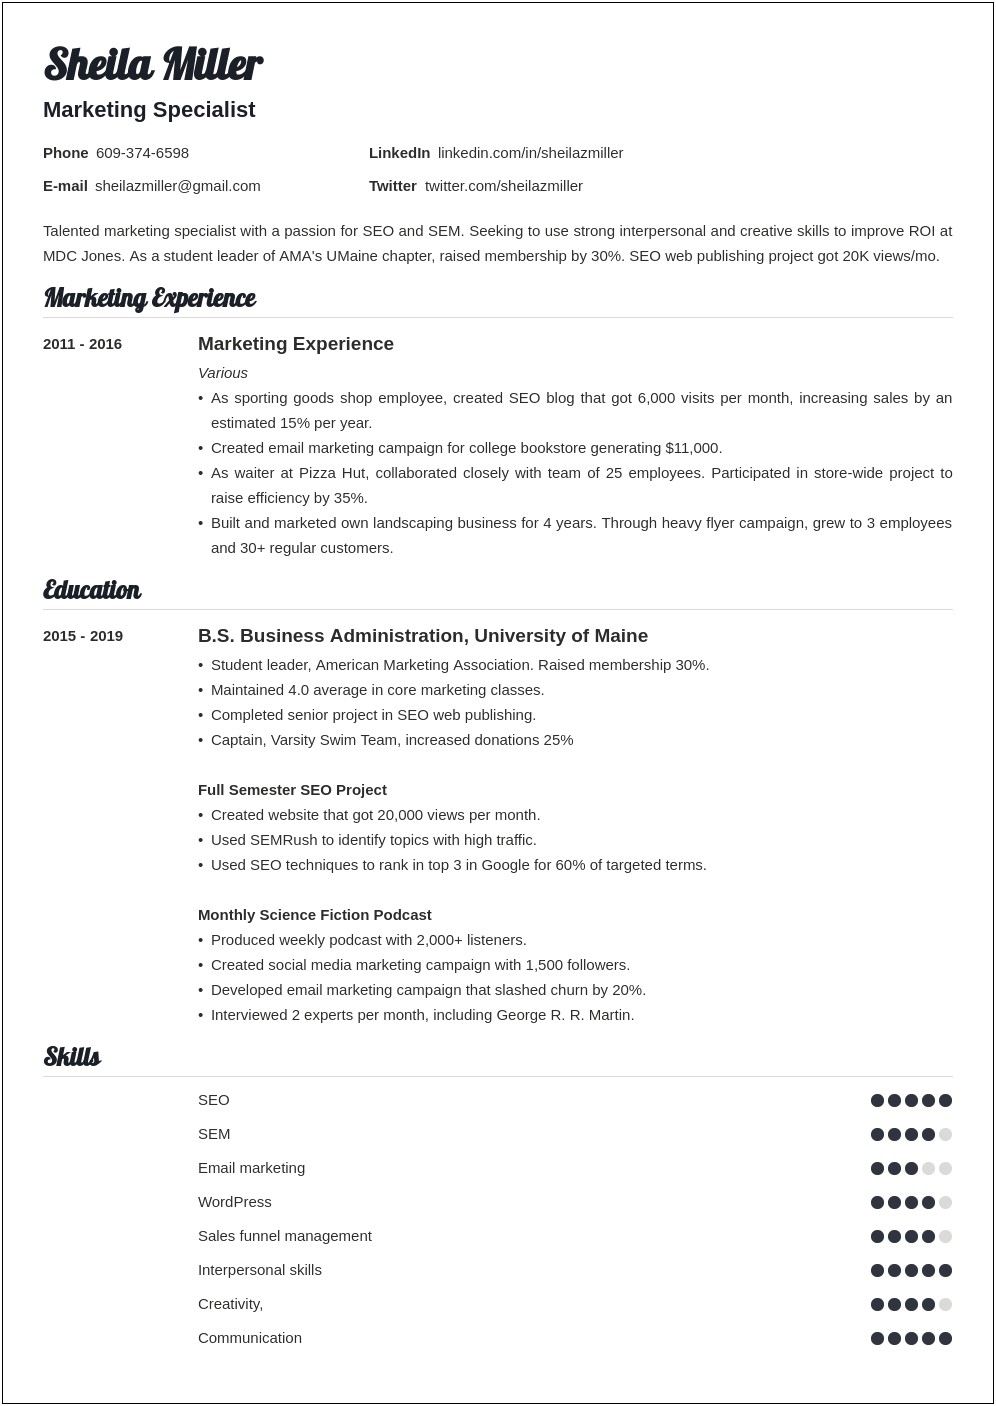 Bad Resume Examples For College Students